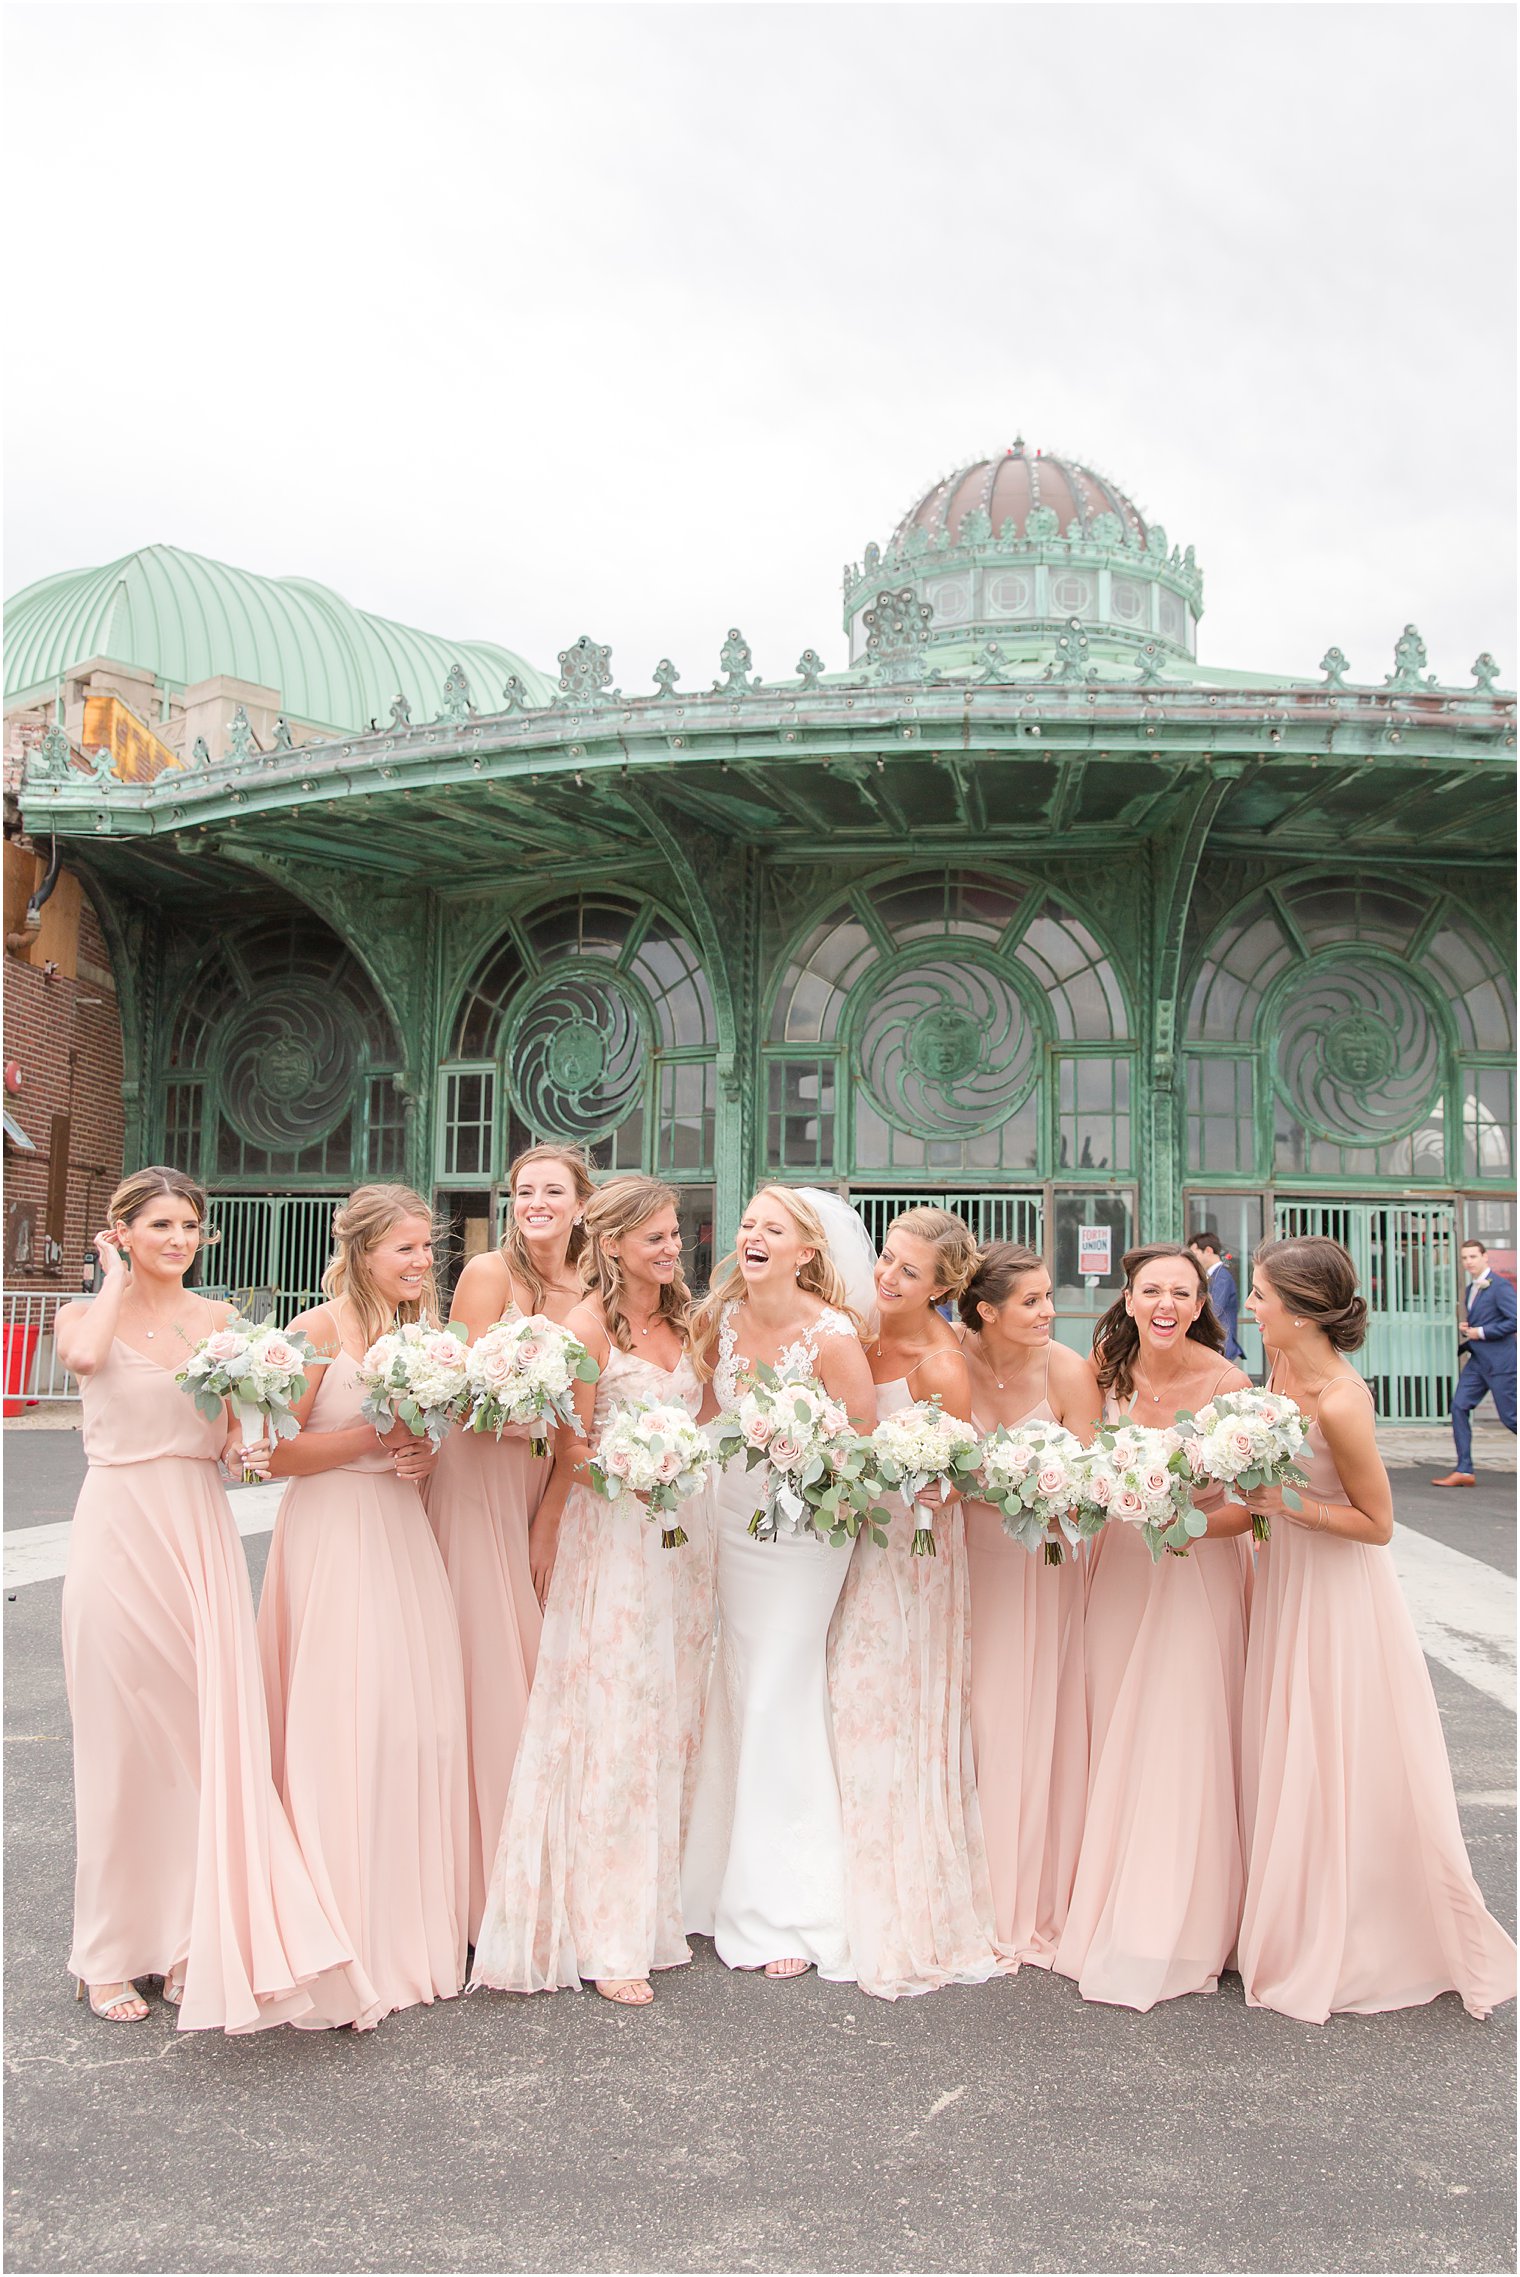 Bridesmaids laughing during portraits at Asbury Park during a windy wedding day